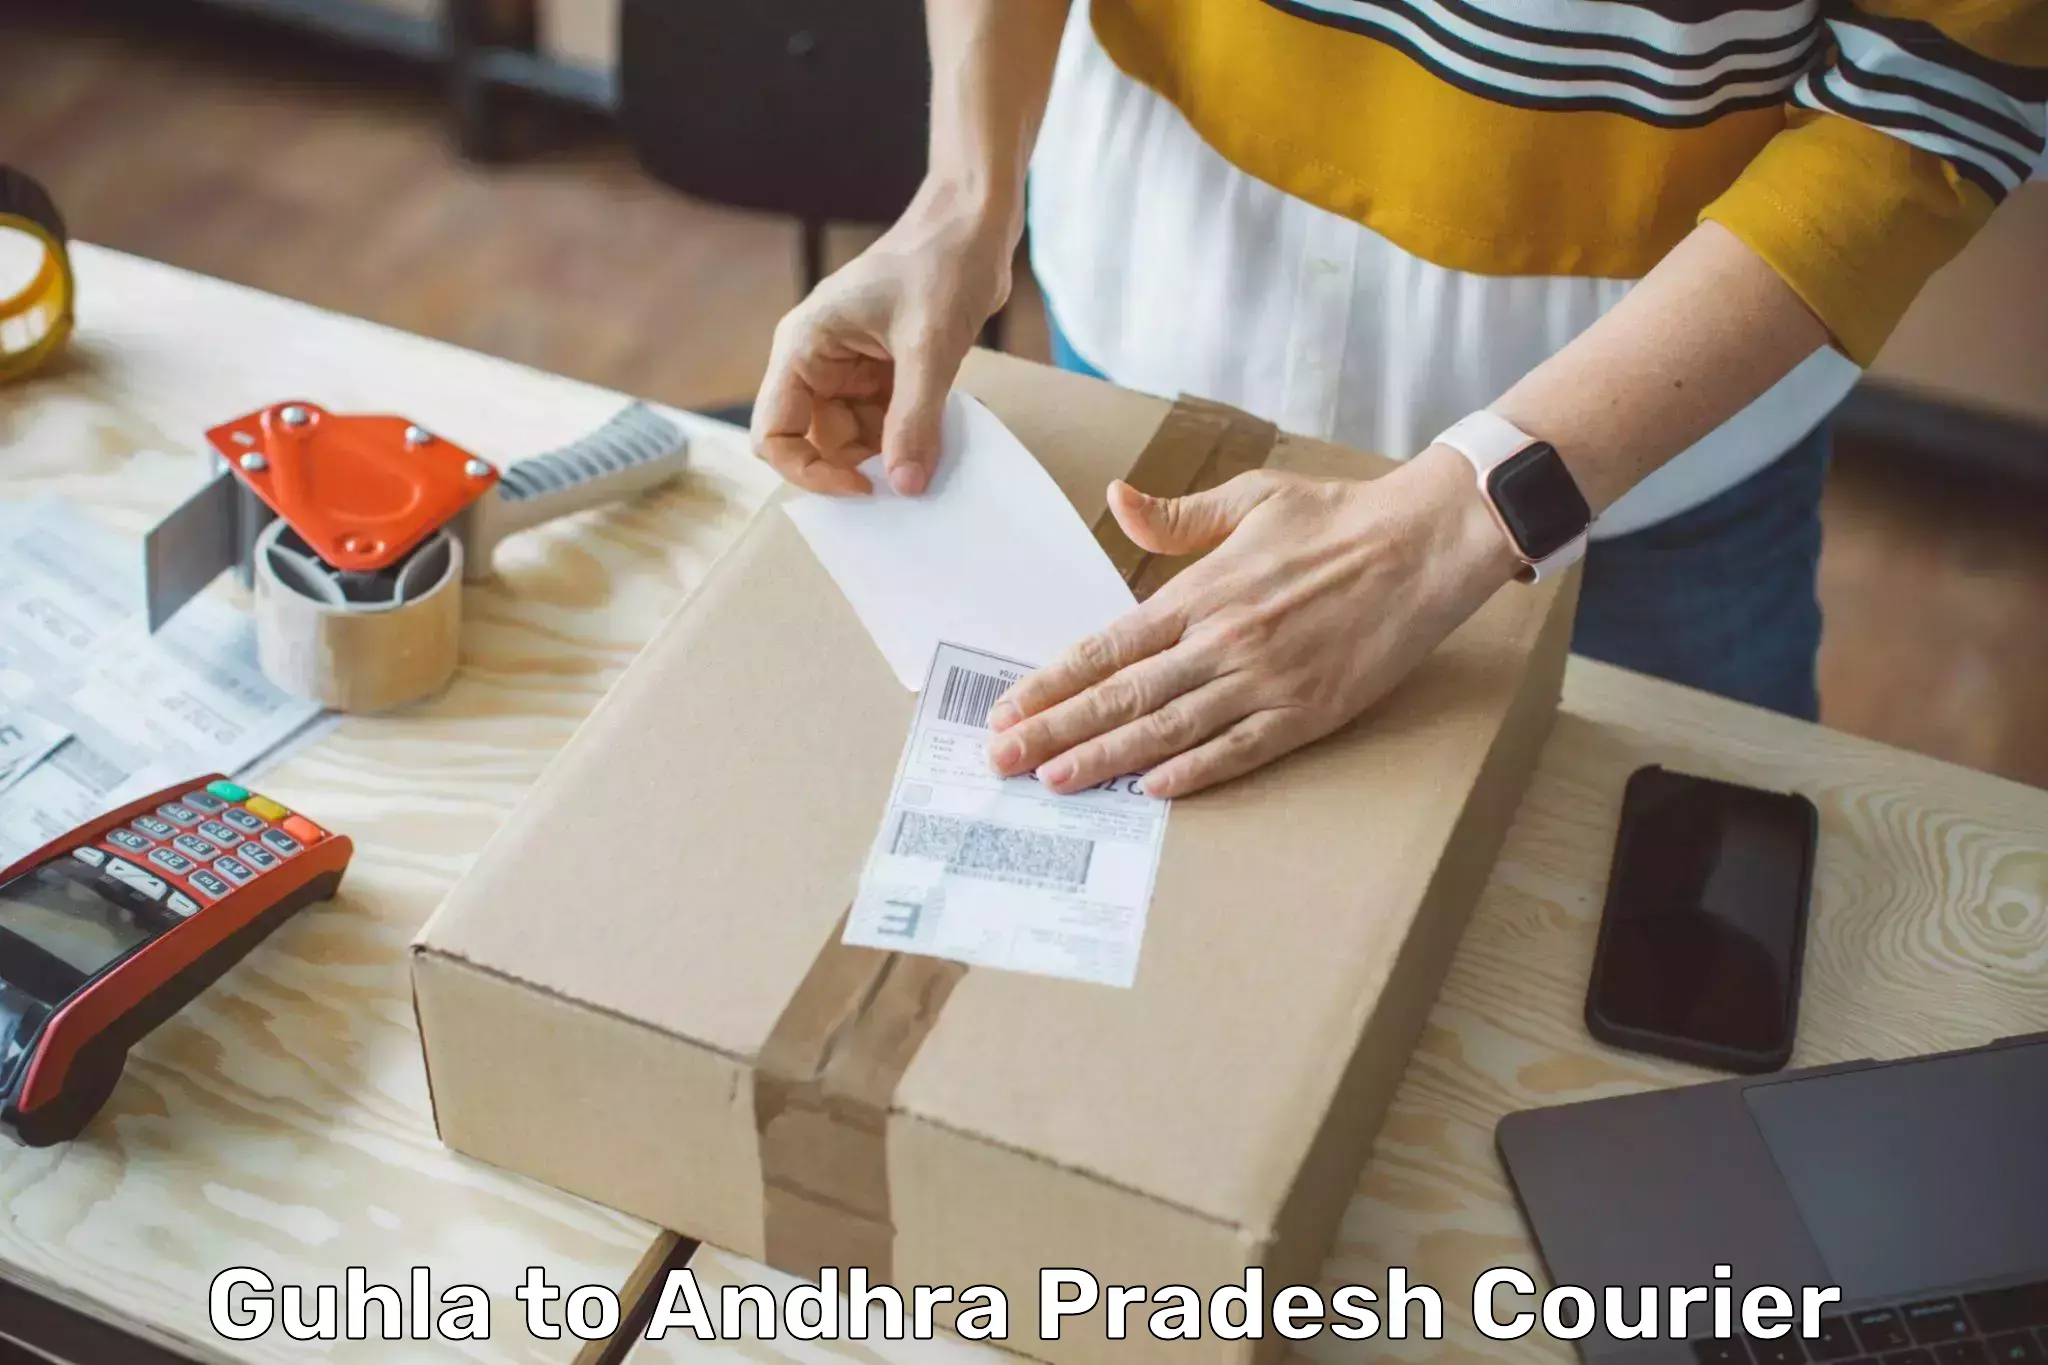 Specialized courier services in Guhla to Andhra Pradesh